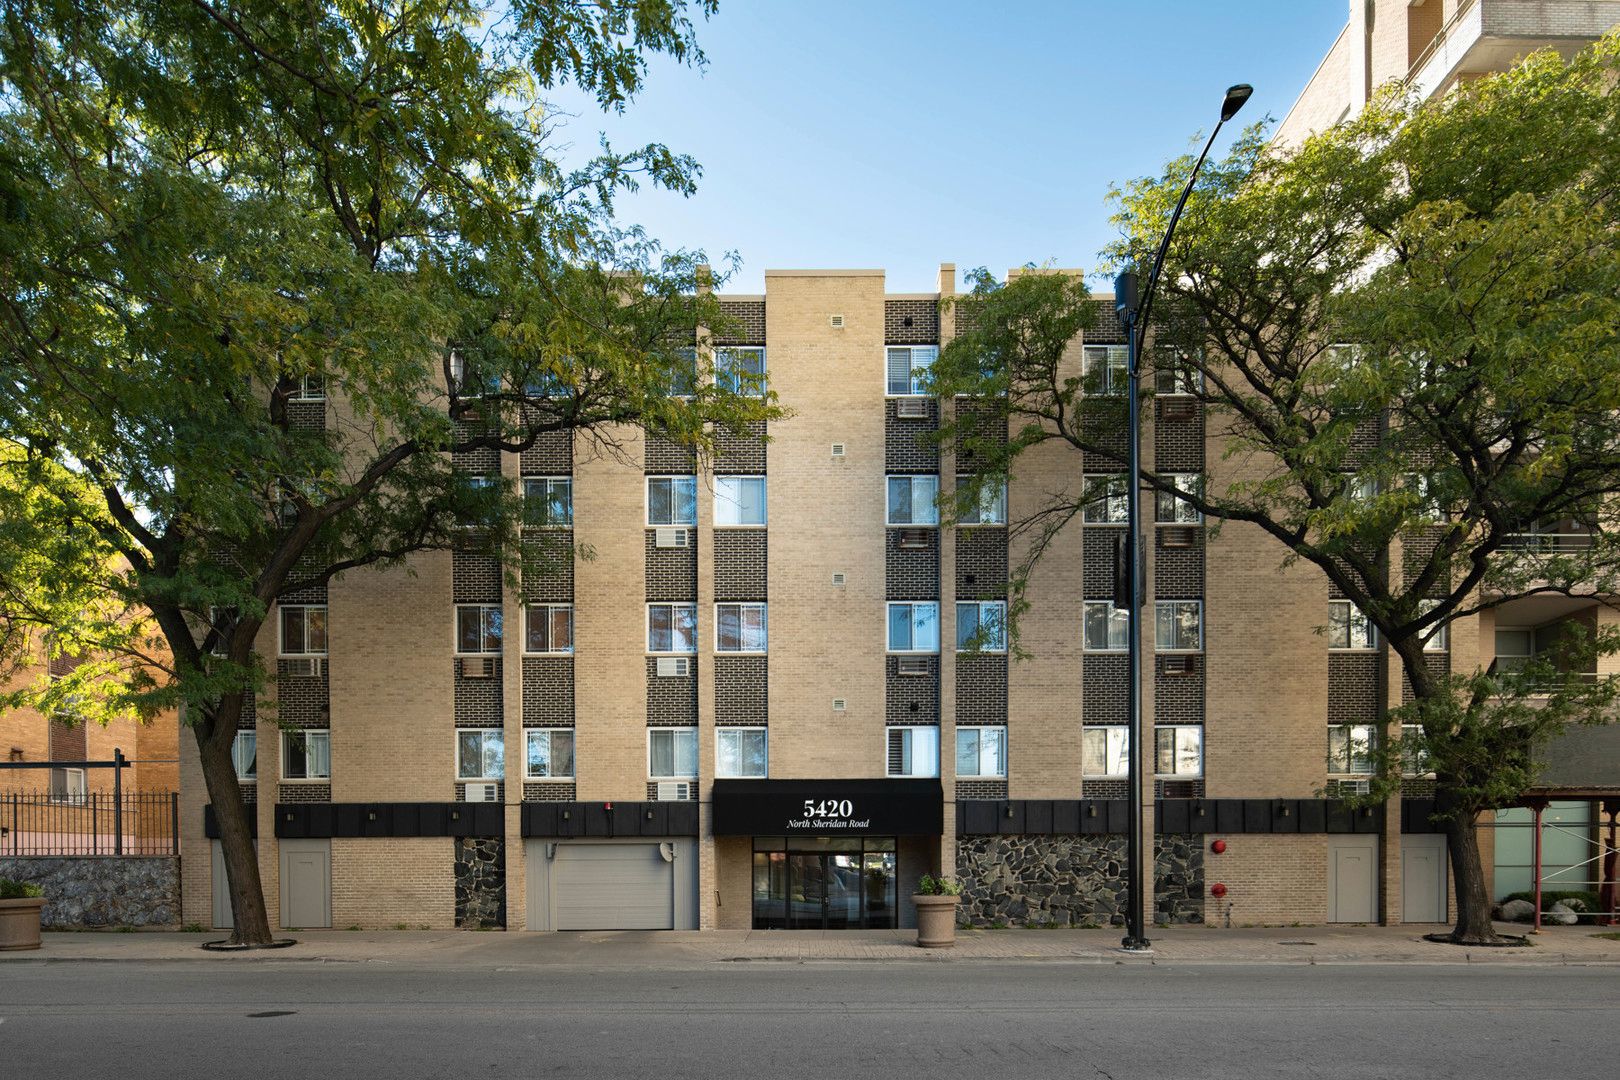 Main Photo: 5420 N Sheridan Road Unit 303 in Chicago: CHI - Edgewater Residential for sale ()  : MLS®# 11645862